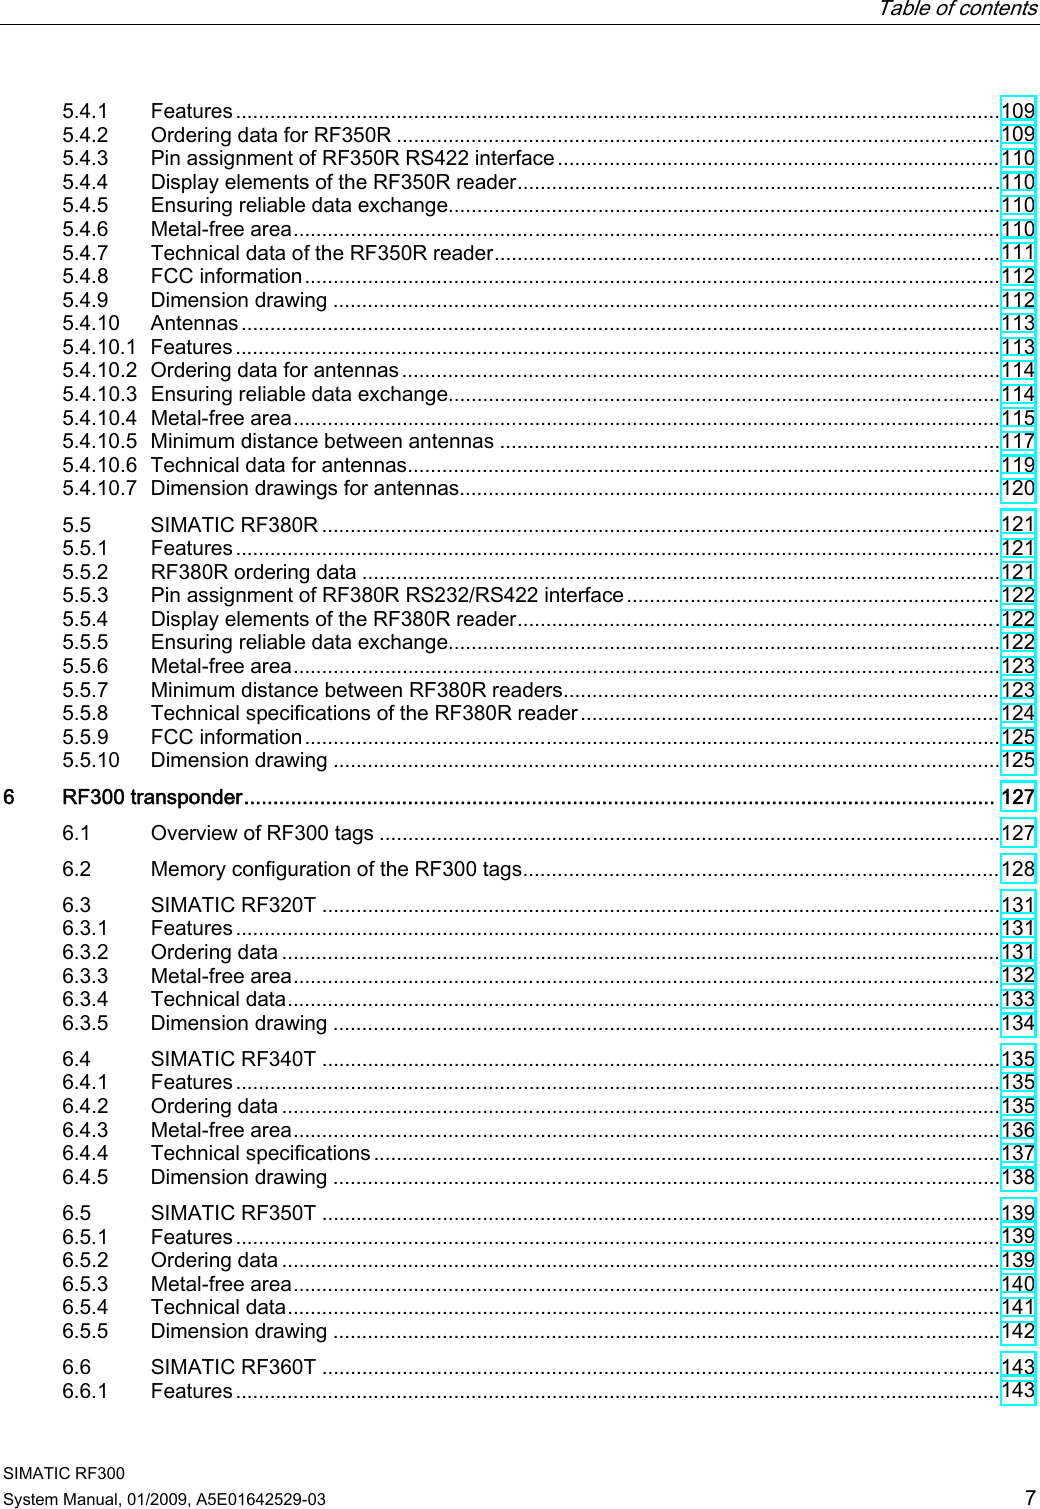   Table of contents   SIMATIC RF300 System Manual, 01/2009, A5E01642529-03  7 5.4.1  Features.....................................................................................................................................109 5.4.2  Ordering data for RF350R .........................................................................................................109 5.4.3  Pin assignment of RF350R RS422 interface.............................................................................110 5.4.4  Display elements of the RF350R reader....................................................................................110 5.4.5  Ensuring reliable data exchange................................................................................................110 5.4.6  Metal-free area...........................................................................................................................110 5.4.7  Technical data of the RF350R reader........................................................................................111 5.4.8  FCC information.........................................................................................................................112 5.4.9  Dimension drawing ....................................................................................................................112 5.4.10  Antennas....................................................................................................................................113 5.4.10.1  Features.....................................................................................................................................113 5.4.10.2  Ordering data for antennas........................................................................................................114 5.4.10.3  Ensuring reliable data exchange................................................................................................114 5.4.10.4  Metal-free area...........................................................................................................................115 5.4.10.5  Minimum distance between antennas .......................................................................................117 5.4.10.6  Technical data for antennas.......................................................................................................119 5.4.10.7  Dimension drawings for antennas..............................................................................................120 5.5  SIMATIC RF380R ......................................................................................................................121 5.5.1  Features.....................................................................................................................................121 5.5.2  RF380R ordering data ...............................................................................................................121 5.5.3  Pin assignment of RF380R RS232/RS422 interface.................................................................122 5.5.4  Display elements of the RF380R reader....................................................................................122 5.5.5  Ensuring reliable data exchange................................................................................................122 5.5.6  Metal-free area...........................................................................................................................123 5.5.7  Minimum distance between RF380R readers............................................................................123 5.5.8  Technical specifications of the RF380R reader.........................................................................124 5.5.9  FCC information.........................................................................................................................125 5.5.10  Dimension drawing ....................................................................................................................125 6  RF300 transponder................................................................................................................................ 127 6.1  Overview of RF300 tags ............................................................................................................127 6.2  Memory configuration of the RF300 tags...................................................................................128 6.3  SIMATIC RF320T ......................................................................................................................131 6.3.1  Features.....................................................................................................................................131 6.3.2  Ordering data .............................................................................................................................131 6.3.3  Metal-free area...........................................................................................................................132 6.3.4  Technical data............................................................................................................................133 6.3.5  Dimension drawing ....................................................................................................................134 6.4  SIMATIC RF340T ......................................................................................................................135 6.4.1  Features.....................................................................................................................................135 6.4.2  Ordering data .............................................................................................................................135 6.4.3  Metal-free area...........................................................................................................................136 6.4.4  Technical specifications .............................................................................................................137 6.4.5  Dimension drawing ....................................................................................................................138 6.5  SIMATIC RF350T ......................................................................................................................139 6.5.1  Features.....................................................................................................................................139 6.5.2  Ordering data .............................................................................................................................139 6.5.3  Metal-free area...........................................................................................................................140 6.5.4  Technical data............................................................................................................................141 6.5.5  Dimension drawing ....................................................................................................................142 6.6  SIMATIC RF360T ......................................................................................................................143 6.6.1  Features.....................................................................................................................................143 